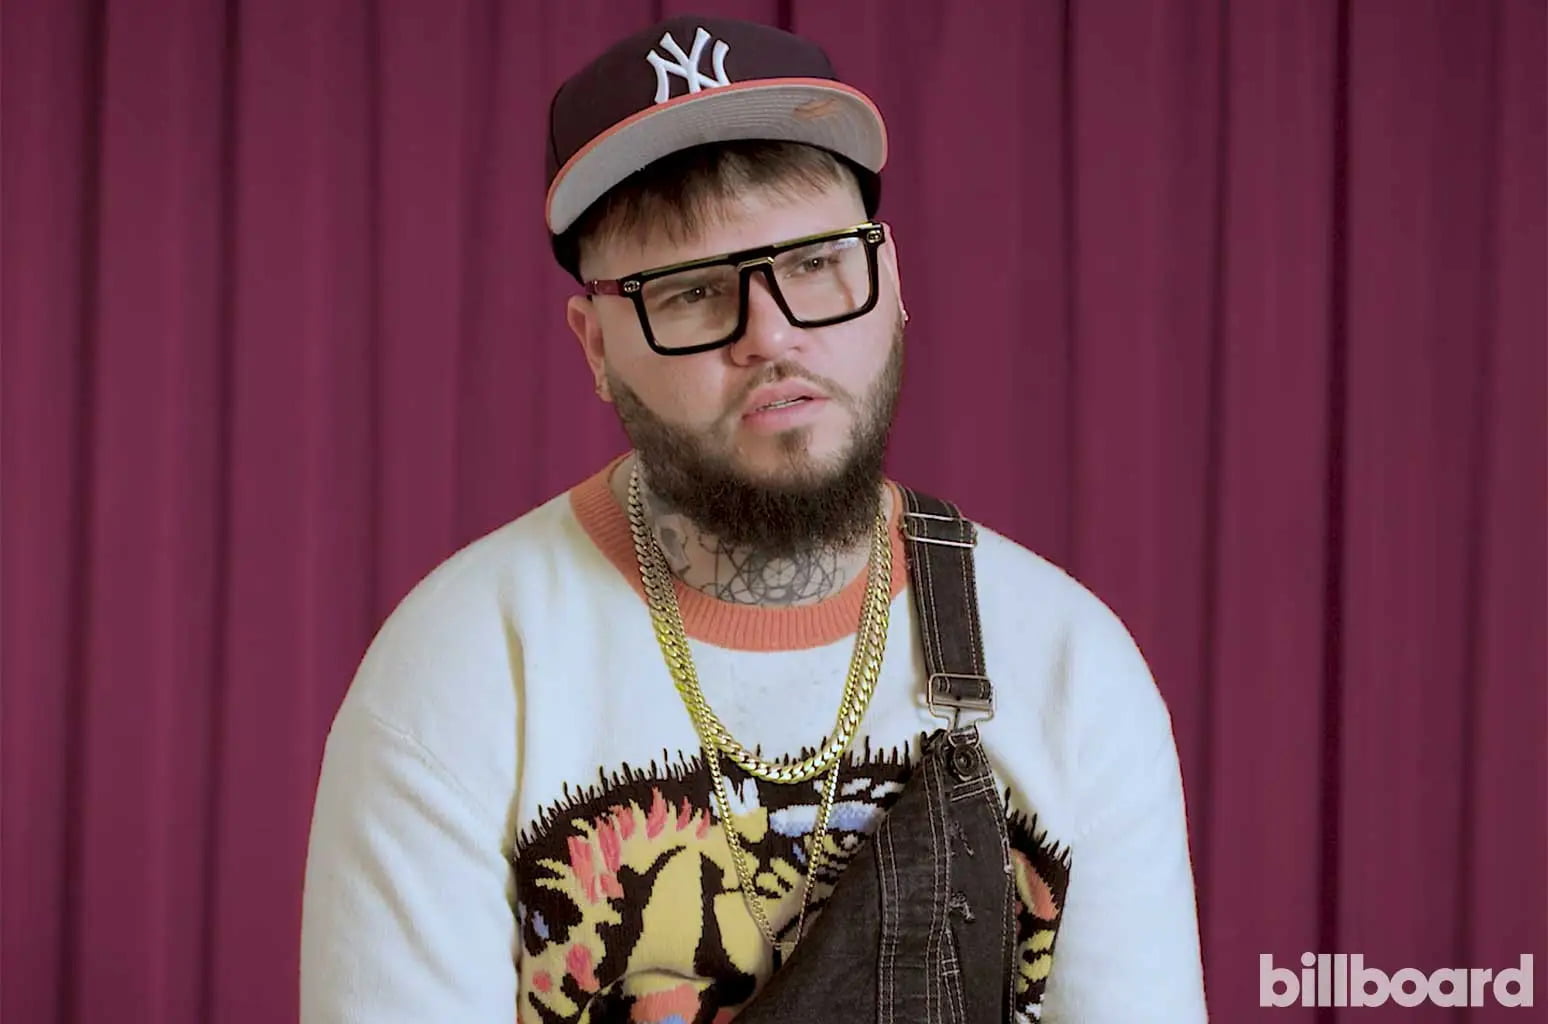 In the intense 'My Lova' video, Farruko discusses the difficulties of his religious awakening.